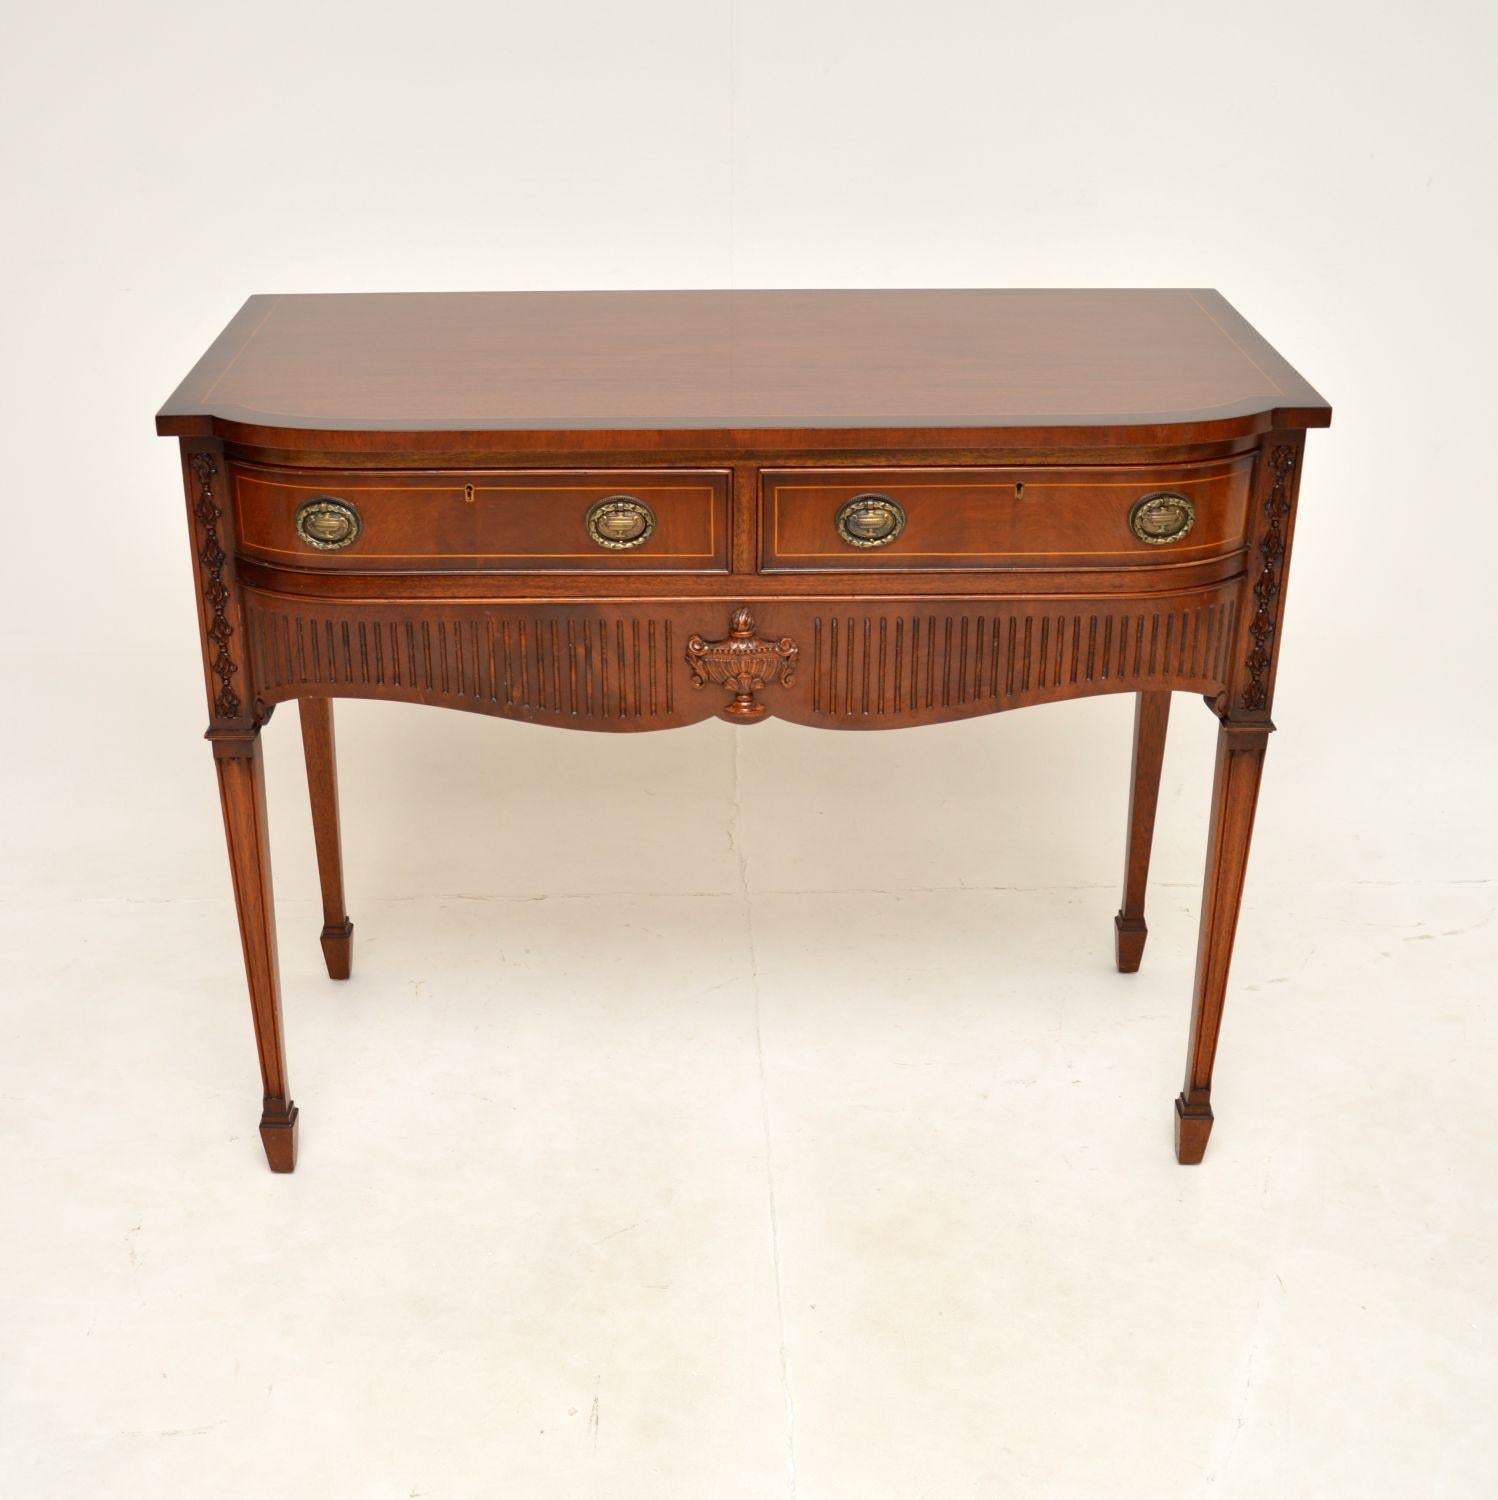 A beautiful antique inlaid console / server table in the Regency style. This was made in England, it dates from the 1950’s.

The quality is outstanding, this is a useful size and has three generous drawers. The drawers are felt lined with cutlery